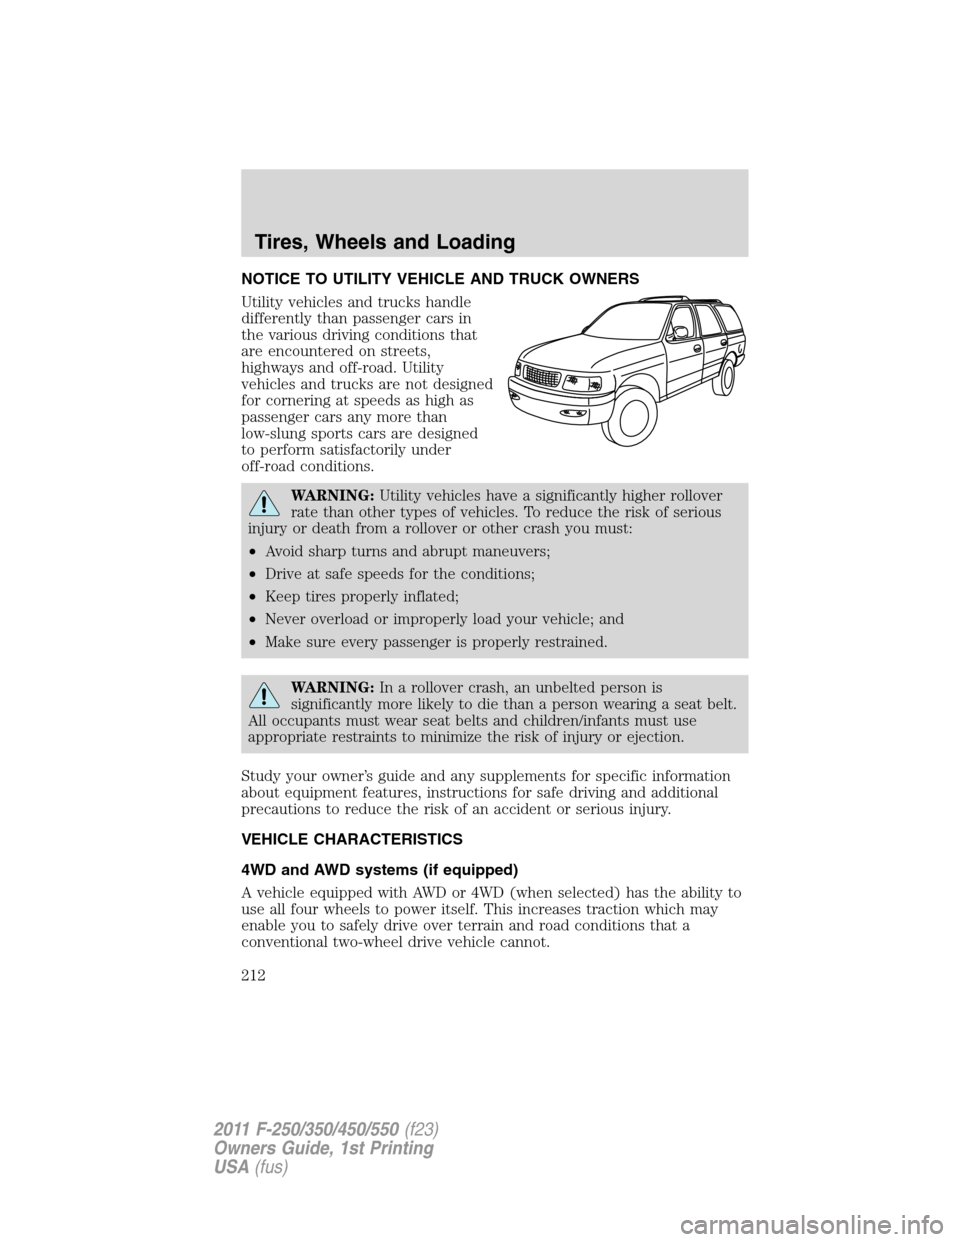 FORD SUPER DUTY 2011 3.G Owners Manual NOTICE TO UTILITY VEHICLE AND TRUCK OWNERS
Utility vehicles and trucks handle
differently than passenger cars in
the various driving conditions that
are encountered on streets,
highways and off-road. 